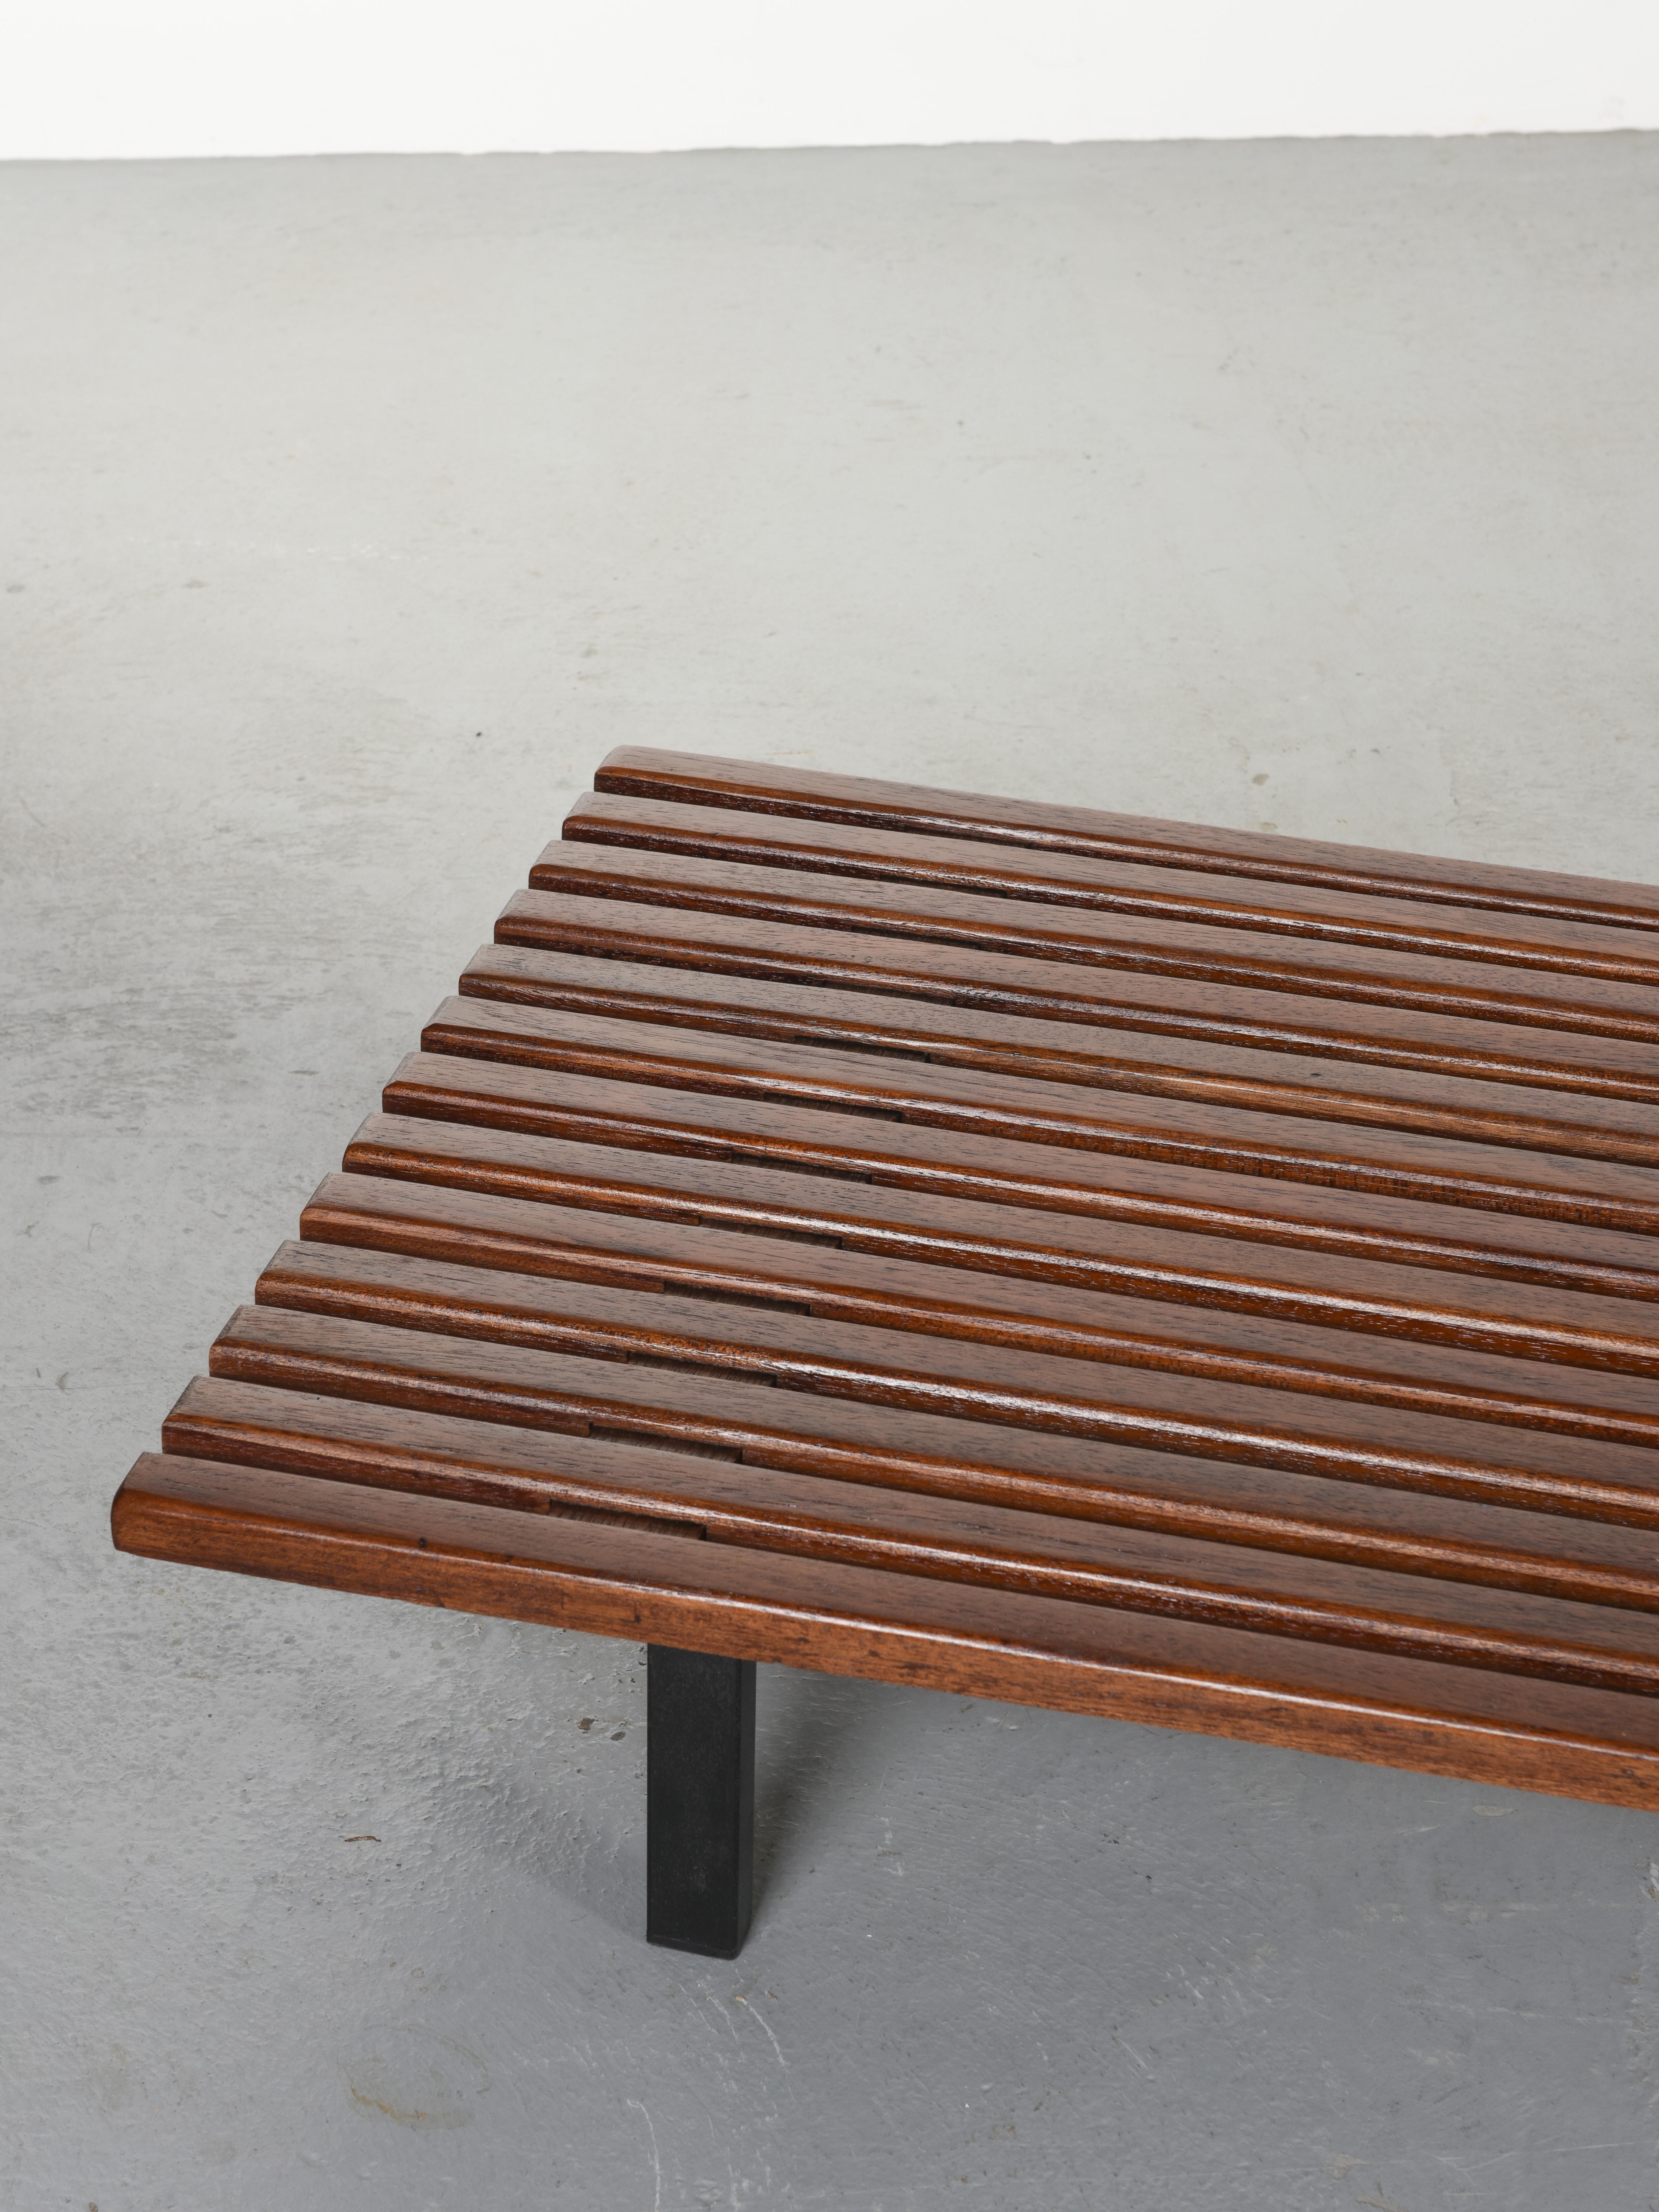 Very long bench by Charlotte Perriand from the Cansado Mining city, Mauritania. Originally made for the flat of Miferma's engineers.

It can be used as a very large coffee table or a modernist low couch with cushions : it is made out of mahogany